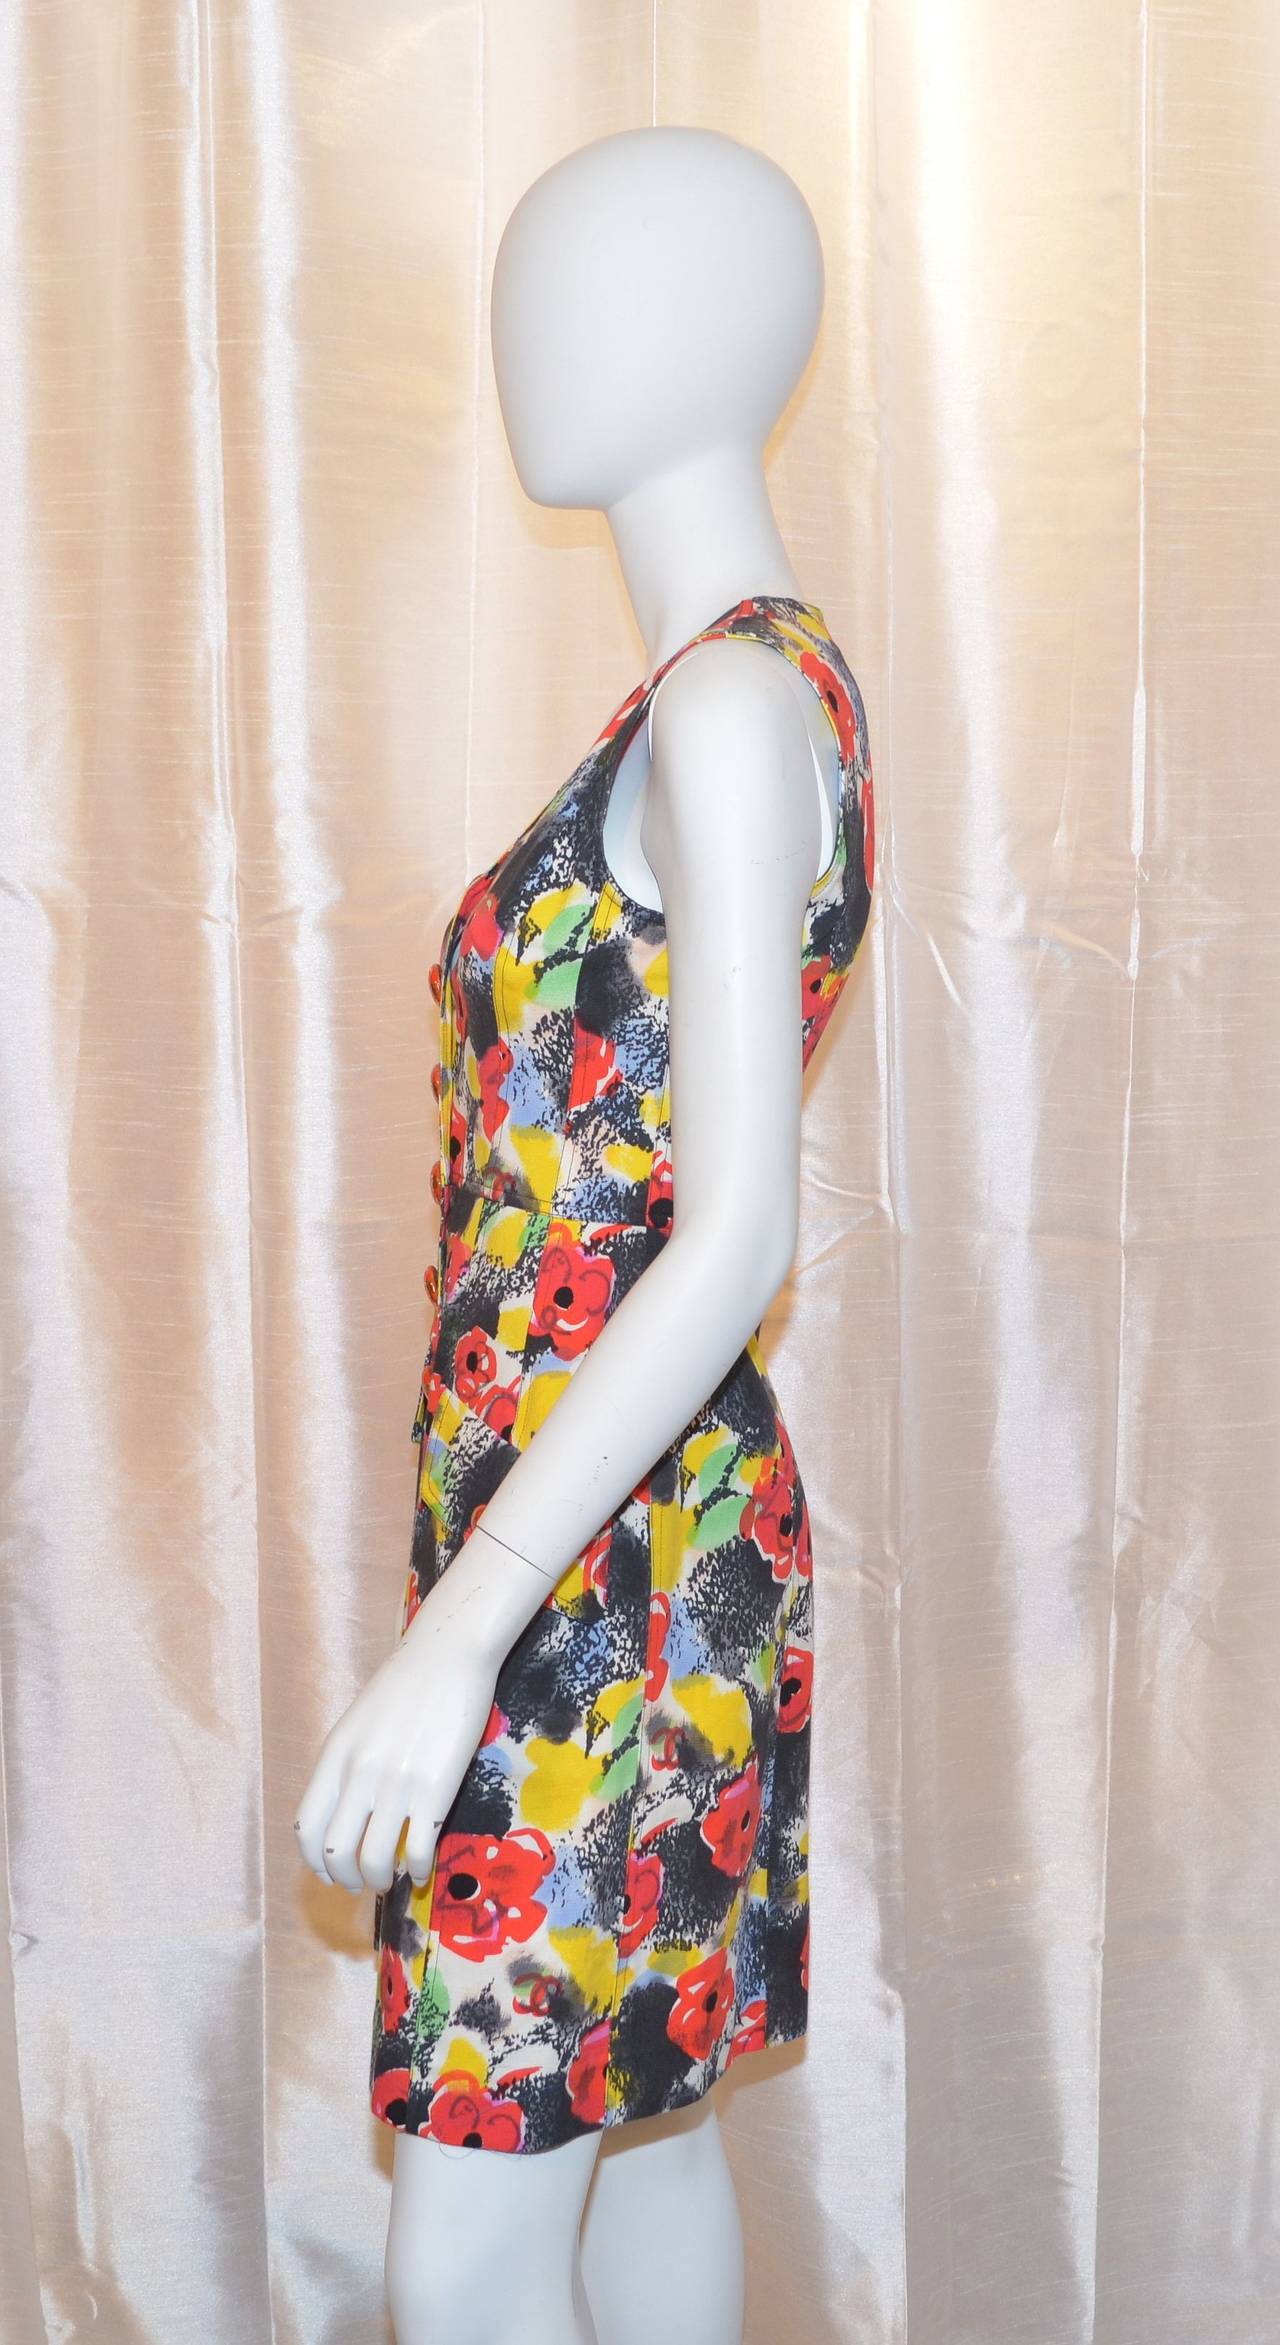 Chanel dress in bold summer yellow and red has large red lucite buttons along the front center and two buttoned flap pockets. 100% cotton. Made in France, size 38.

Measurements:
Bust - 30''
Waist - 27''
Hips - 37''
Length - 35''